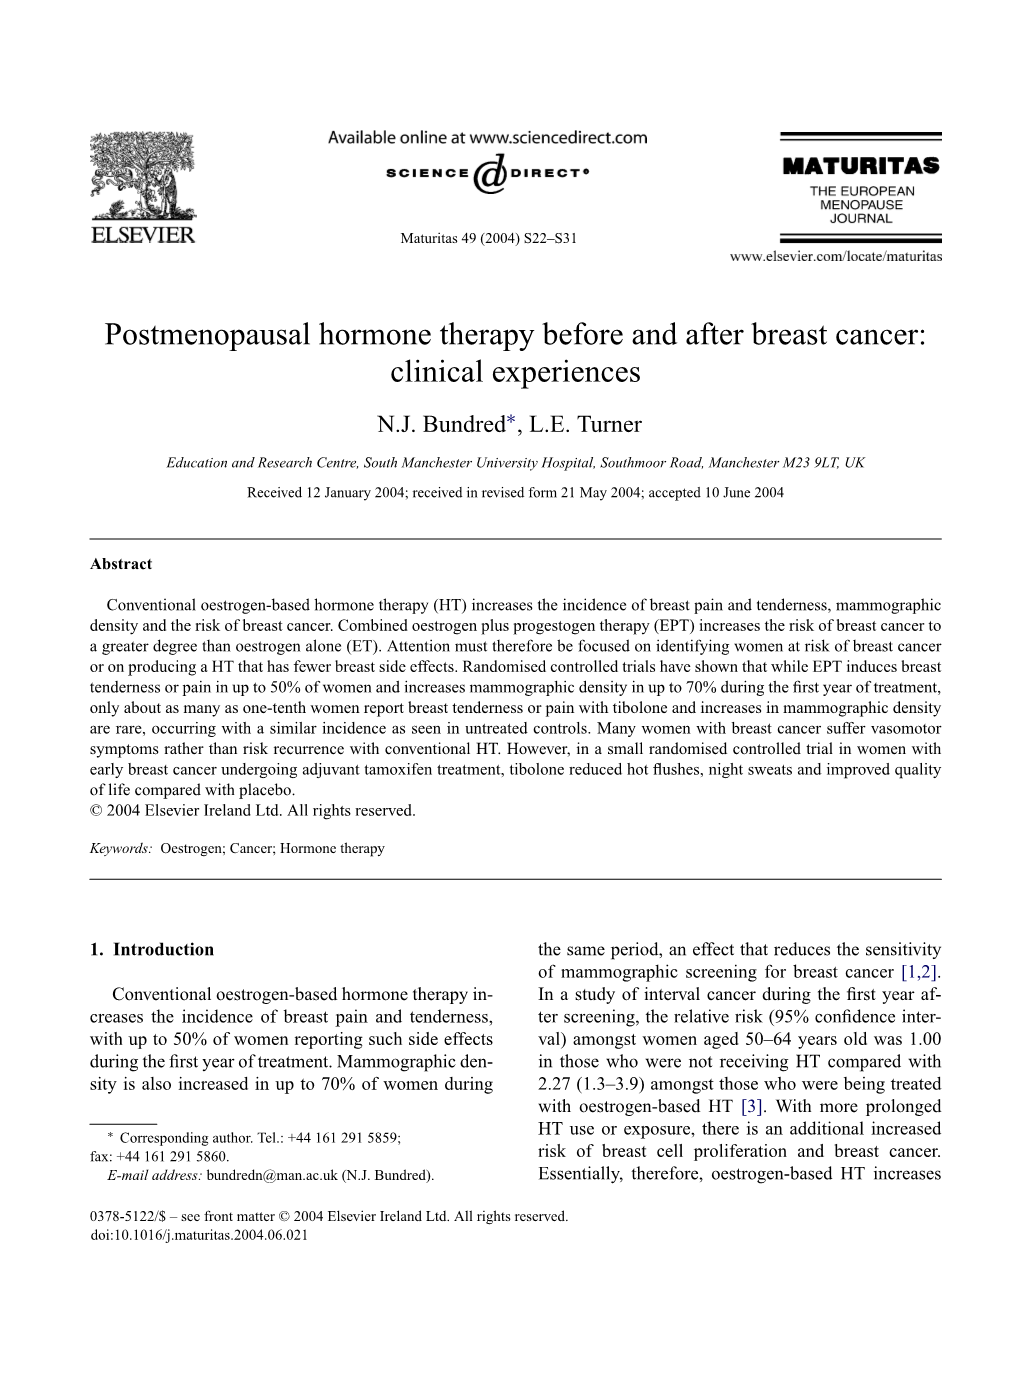 Postmenopausal Hormone Therapy Before and After Breast Cancer: Clinical Experiences